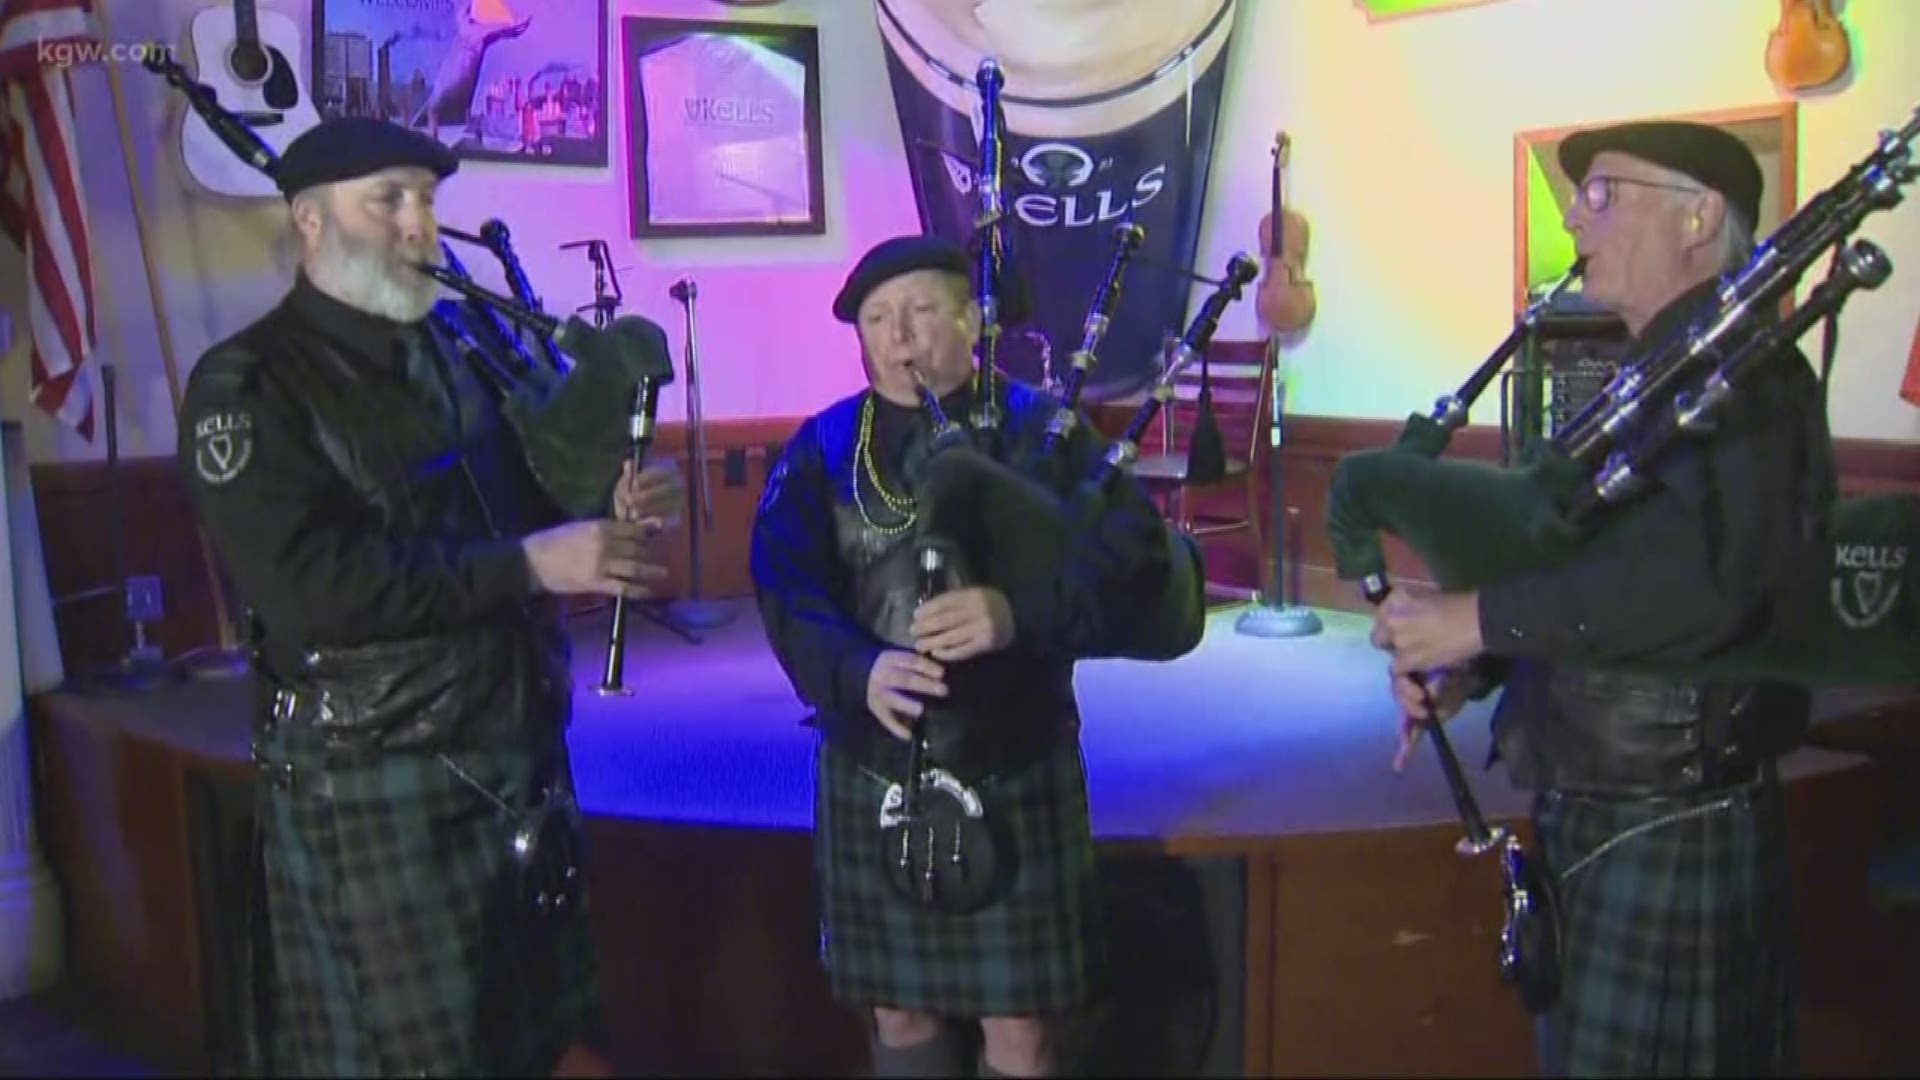 Bagpipers perform at the restaurant in anticipation of St. Patrick's Day.